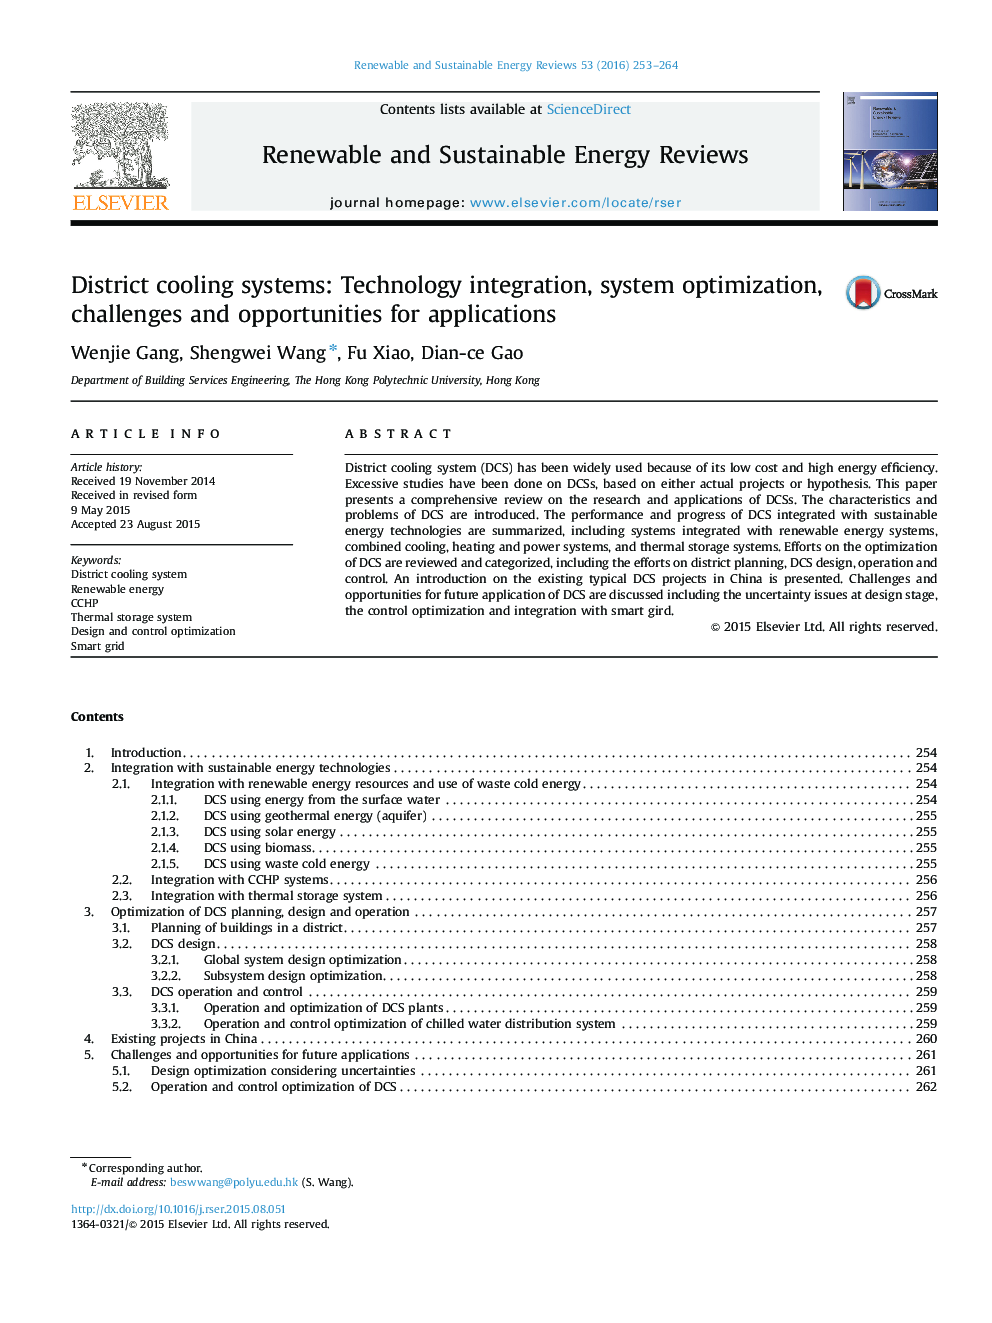 District cooling systems: Technology integration, system optimization, challenges and opportunities for applications